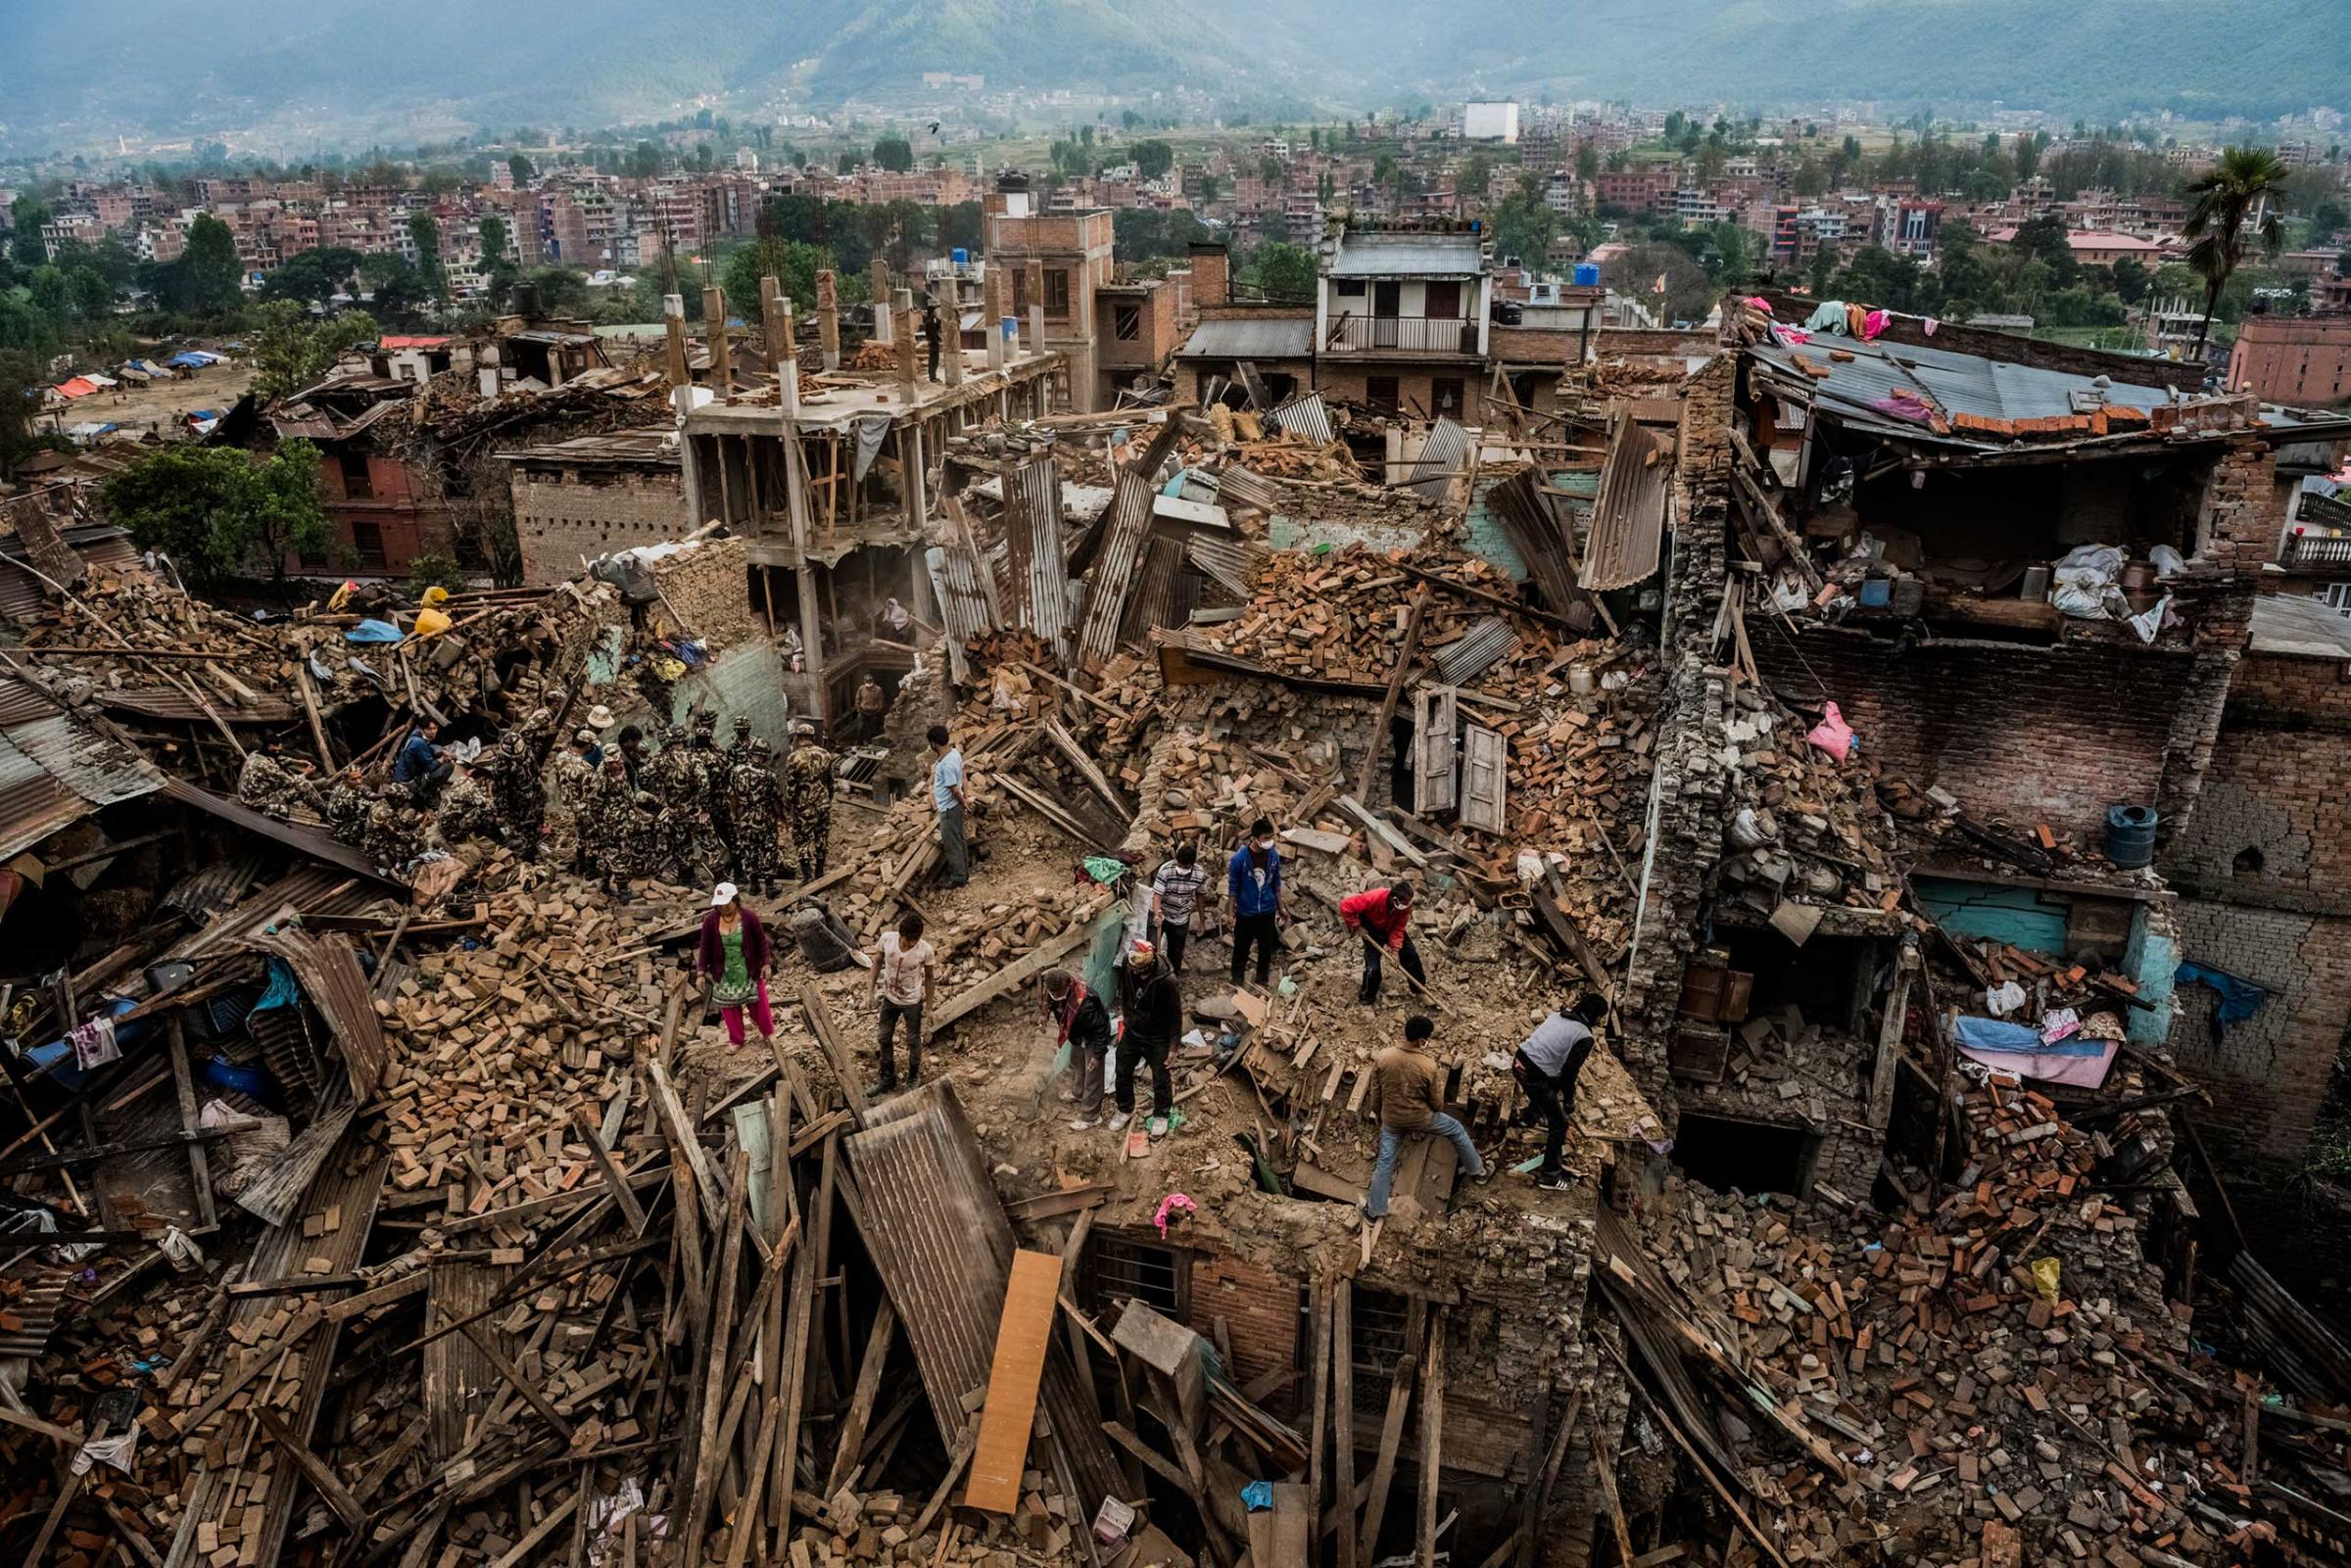 Nepalese security workers search rubble for bodies as residents try to find salvageable valuables in their earthquake-destroyed homes in Bhaktapur, Nepal. Over 2.8 million people were left homeless by the quake. April 29, 2015.